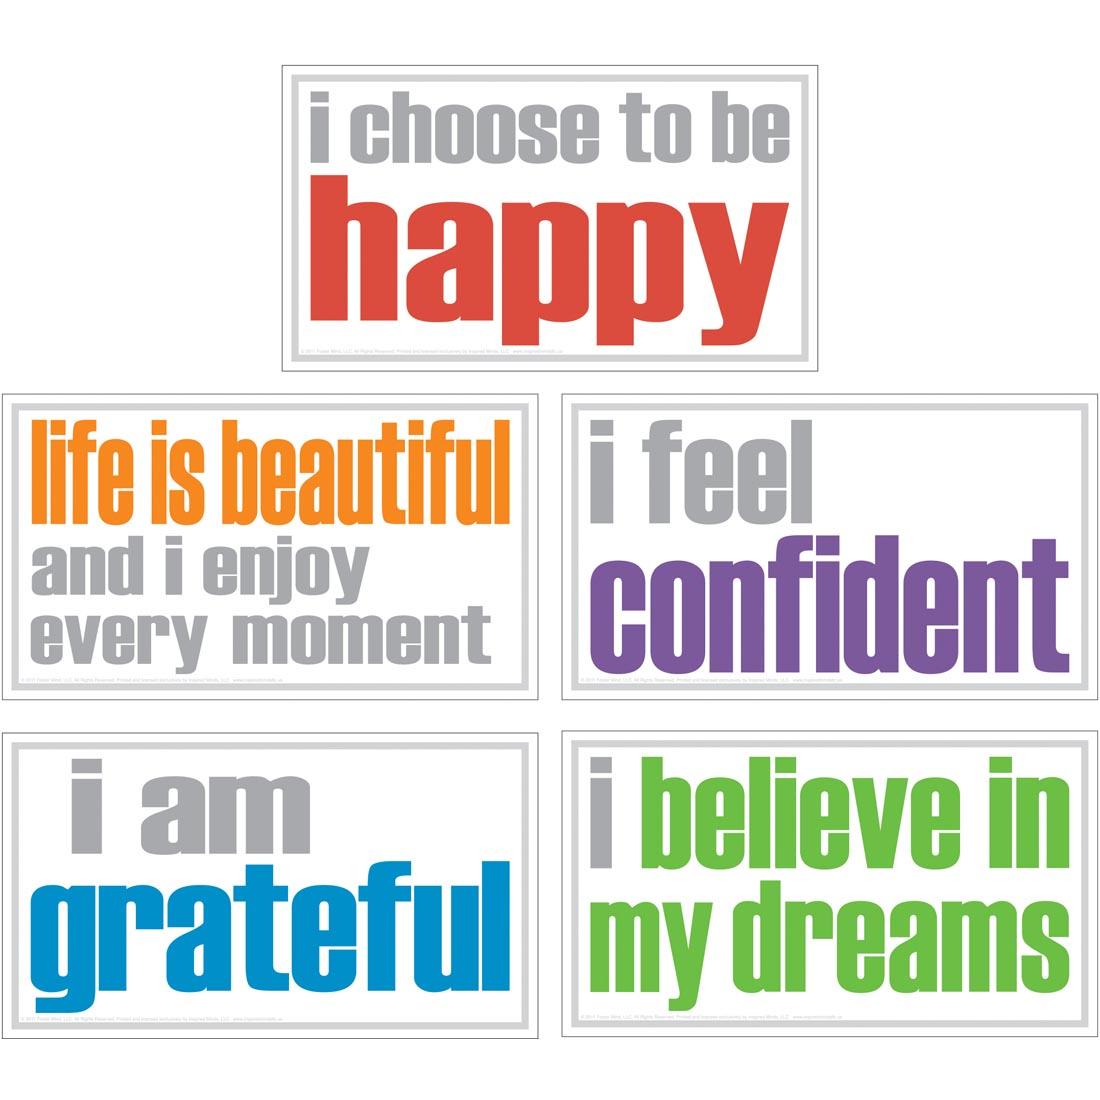 Inspired Minds Poster Set includes the messages I choose to be happy, life is beautiful and I enjoy every moment, I feel confident, I am grateful, I believe in my dreams